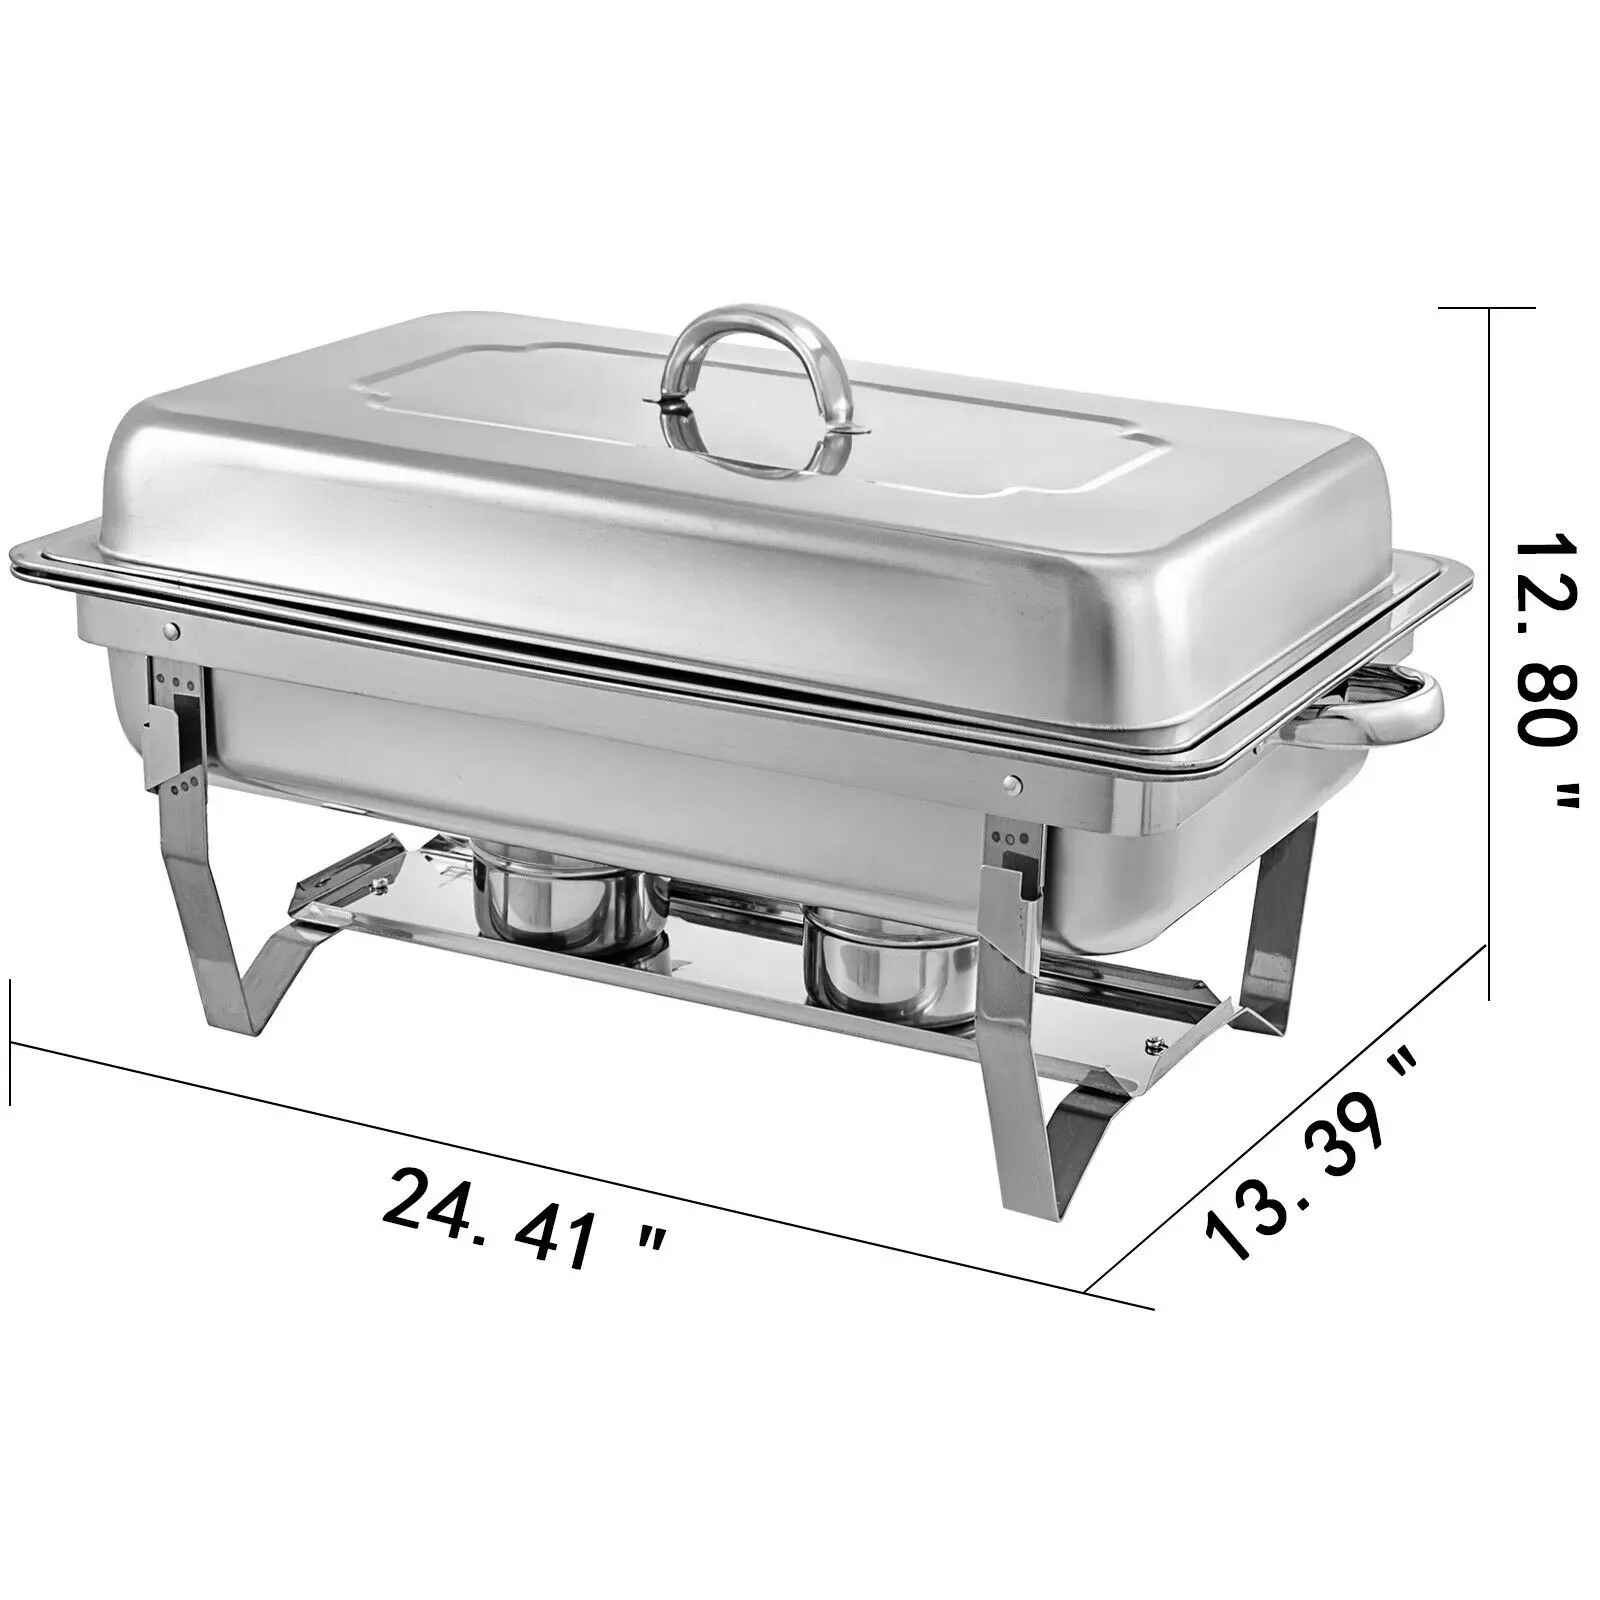 Wholesale Competitive cheap Price Economic folding Chafer Stainless Steel Chafing Dishes 8 Quart full size pan